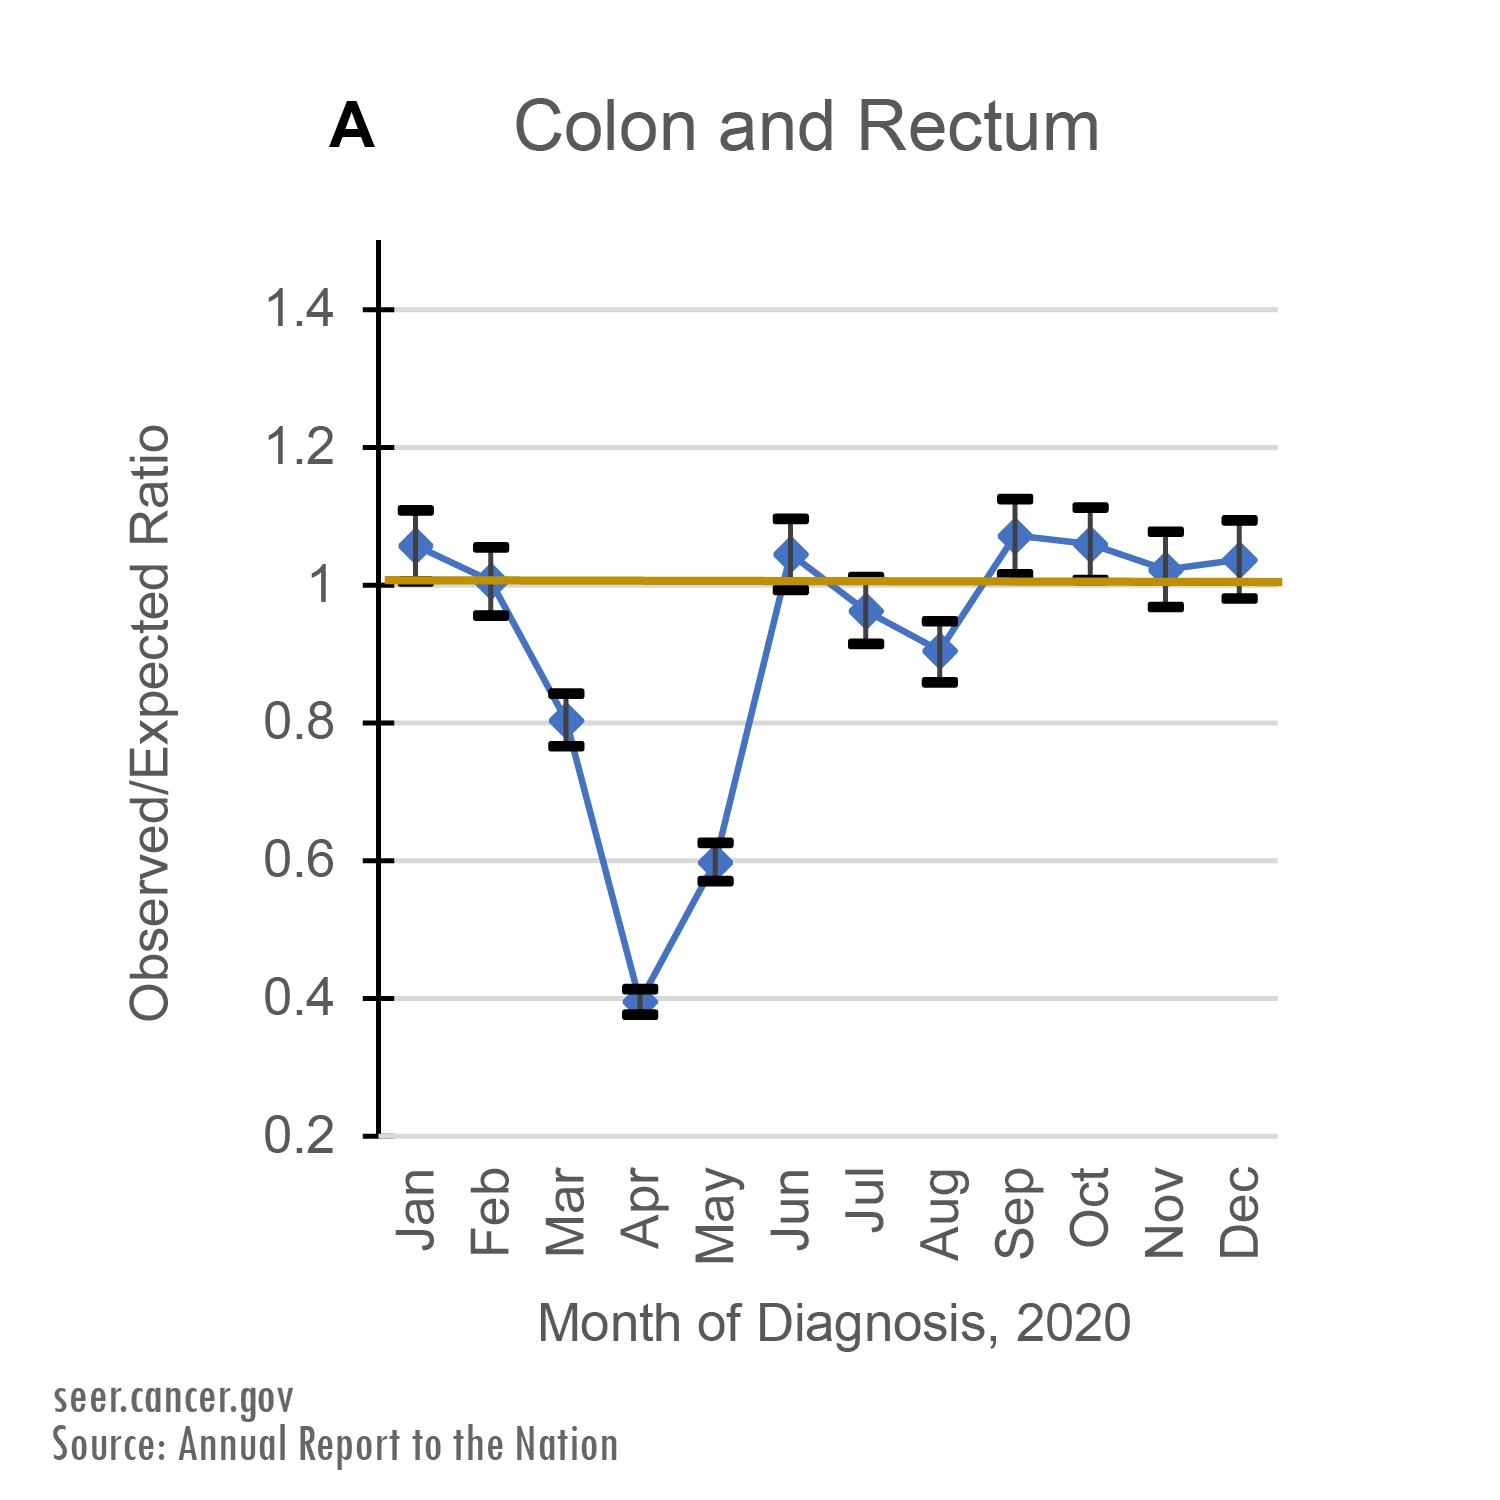 Observed/Expected Ratio of Prostate cancer diagnoses by Month of Diagnosis, 2020. Between March and May of 2020, cancer registries recorded far fewer cases than expected. While the rate of new cancer diagnoses hovered around predicted levels in the second half of 2020, it did not make up for the drop seen between March and May.